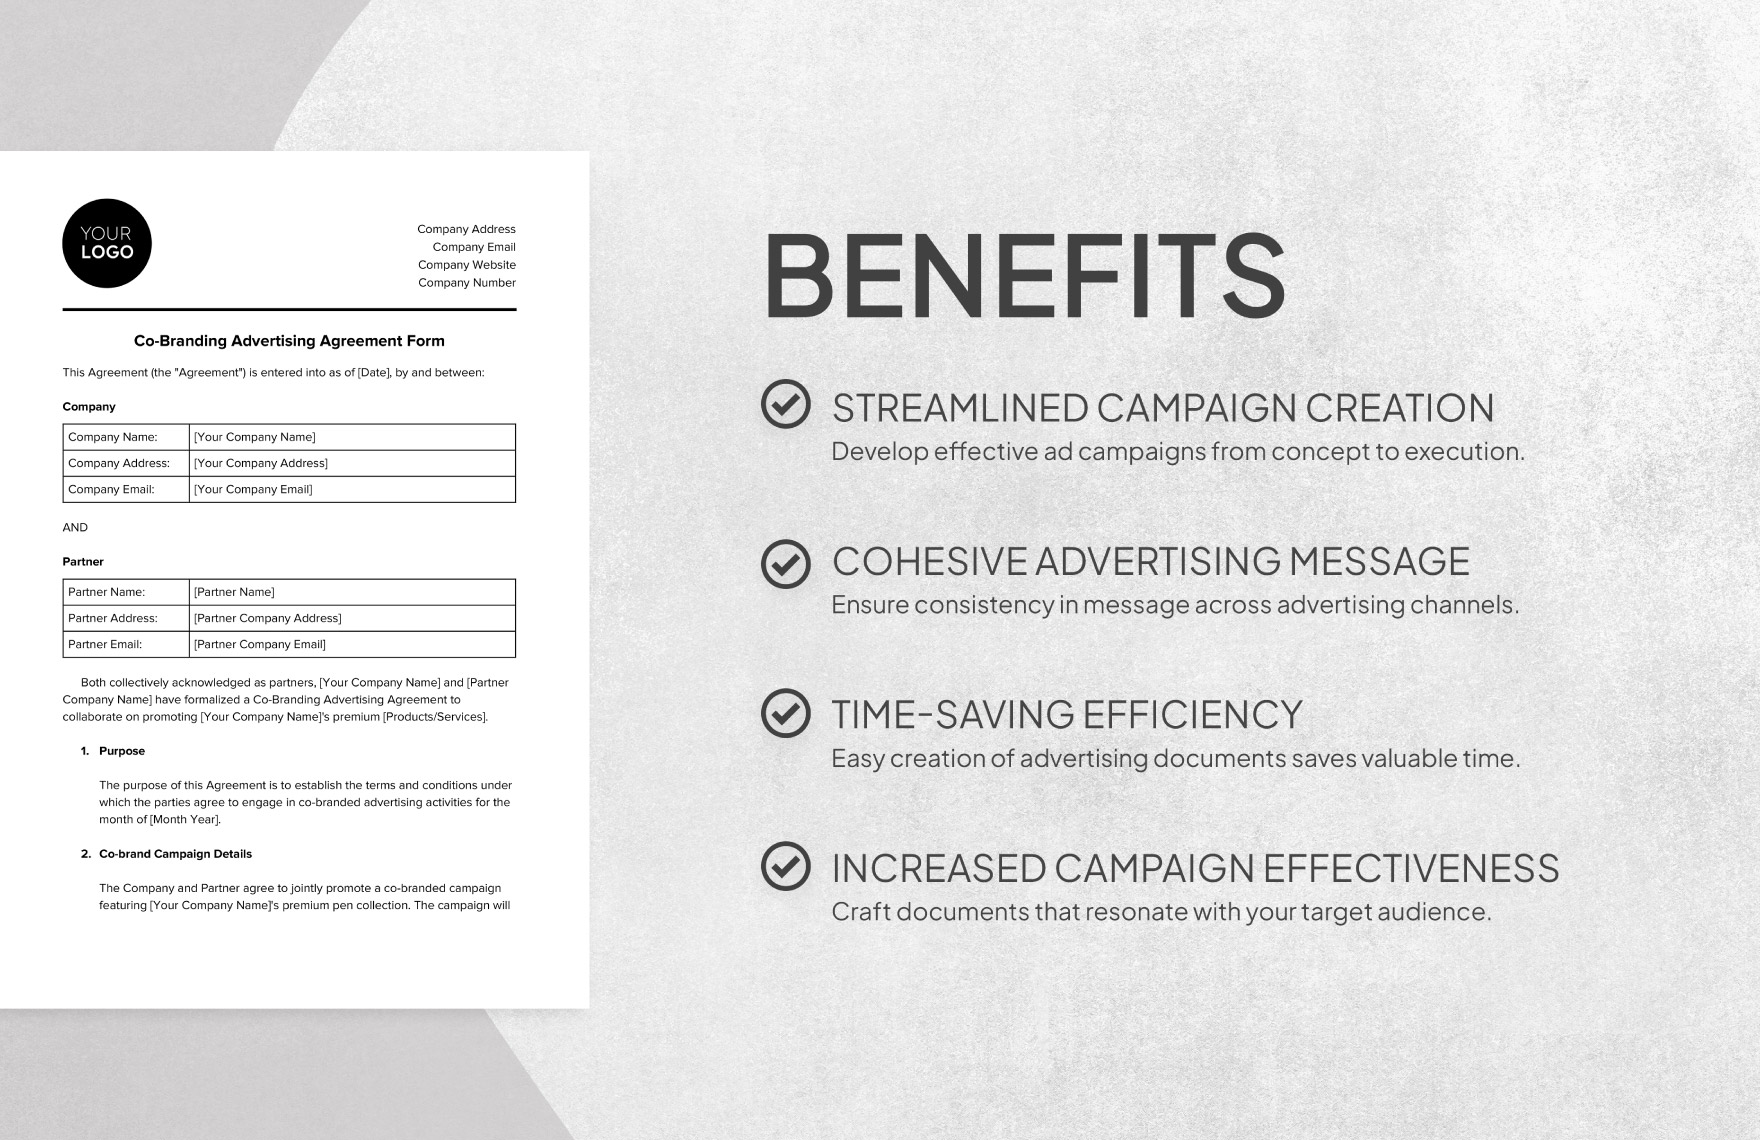 Co-Branding Advertising Agreement Form Template